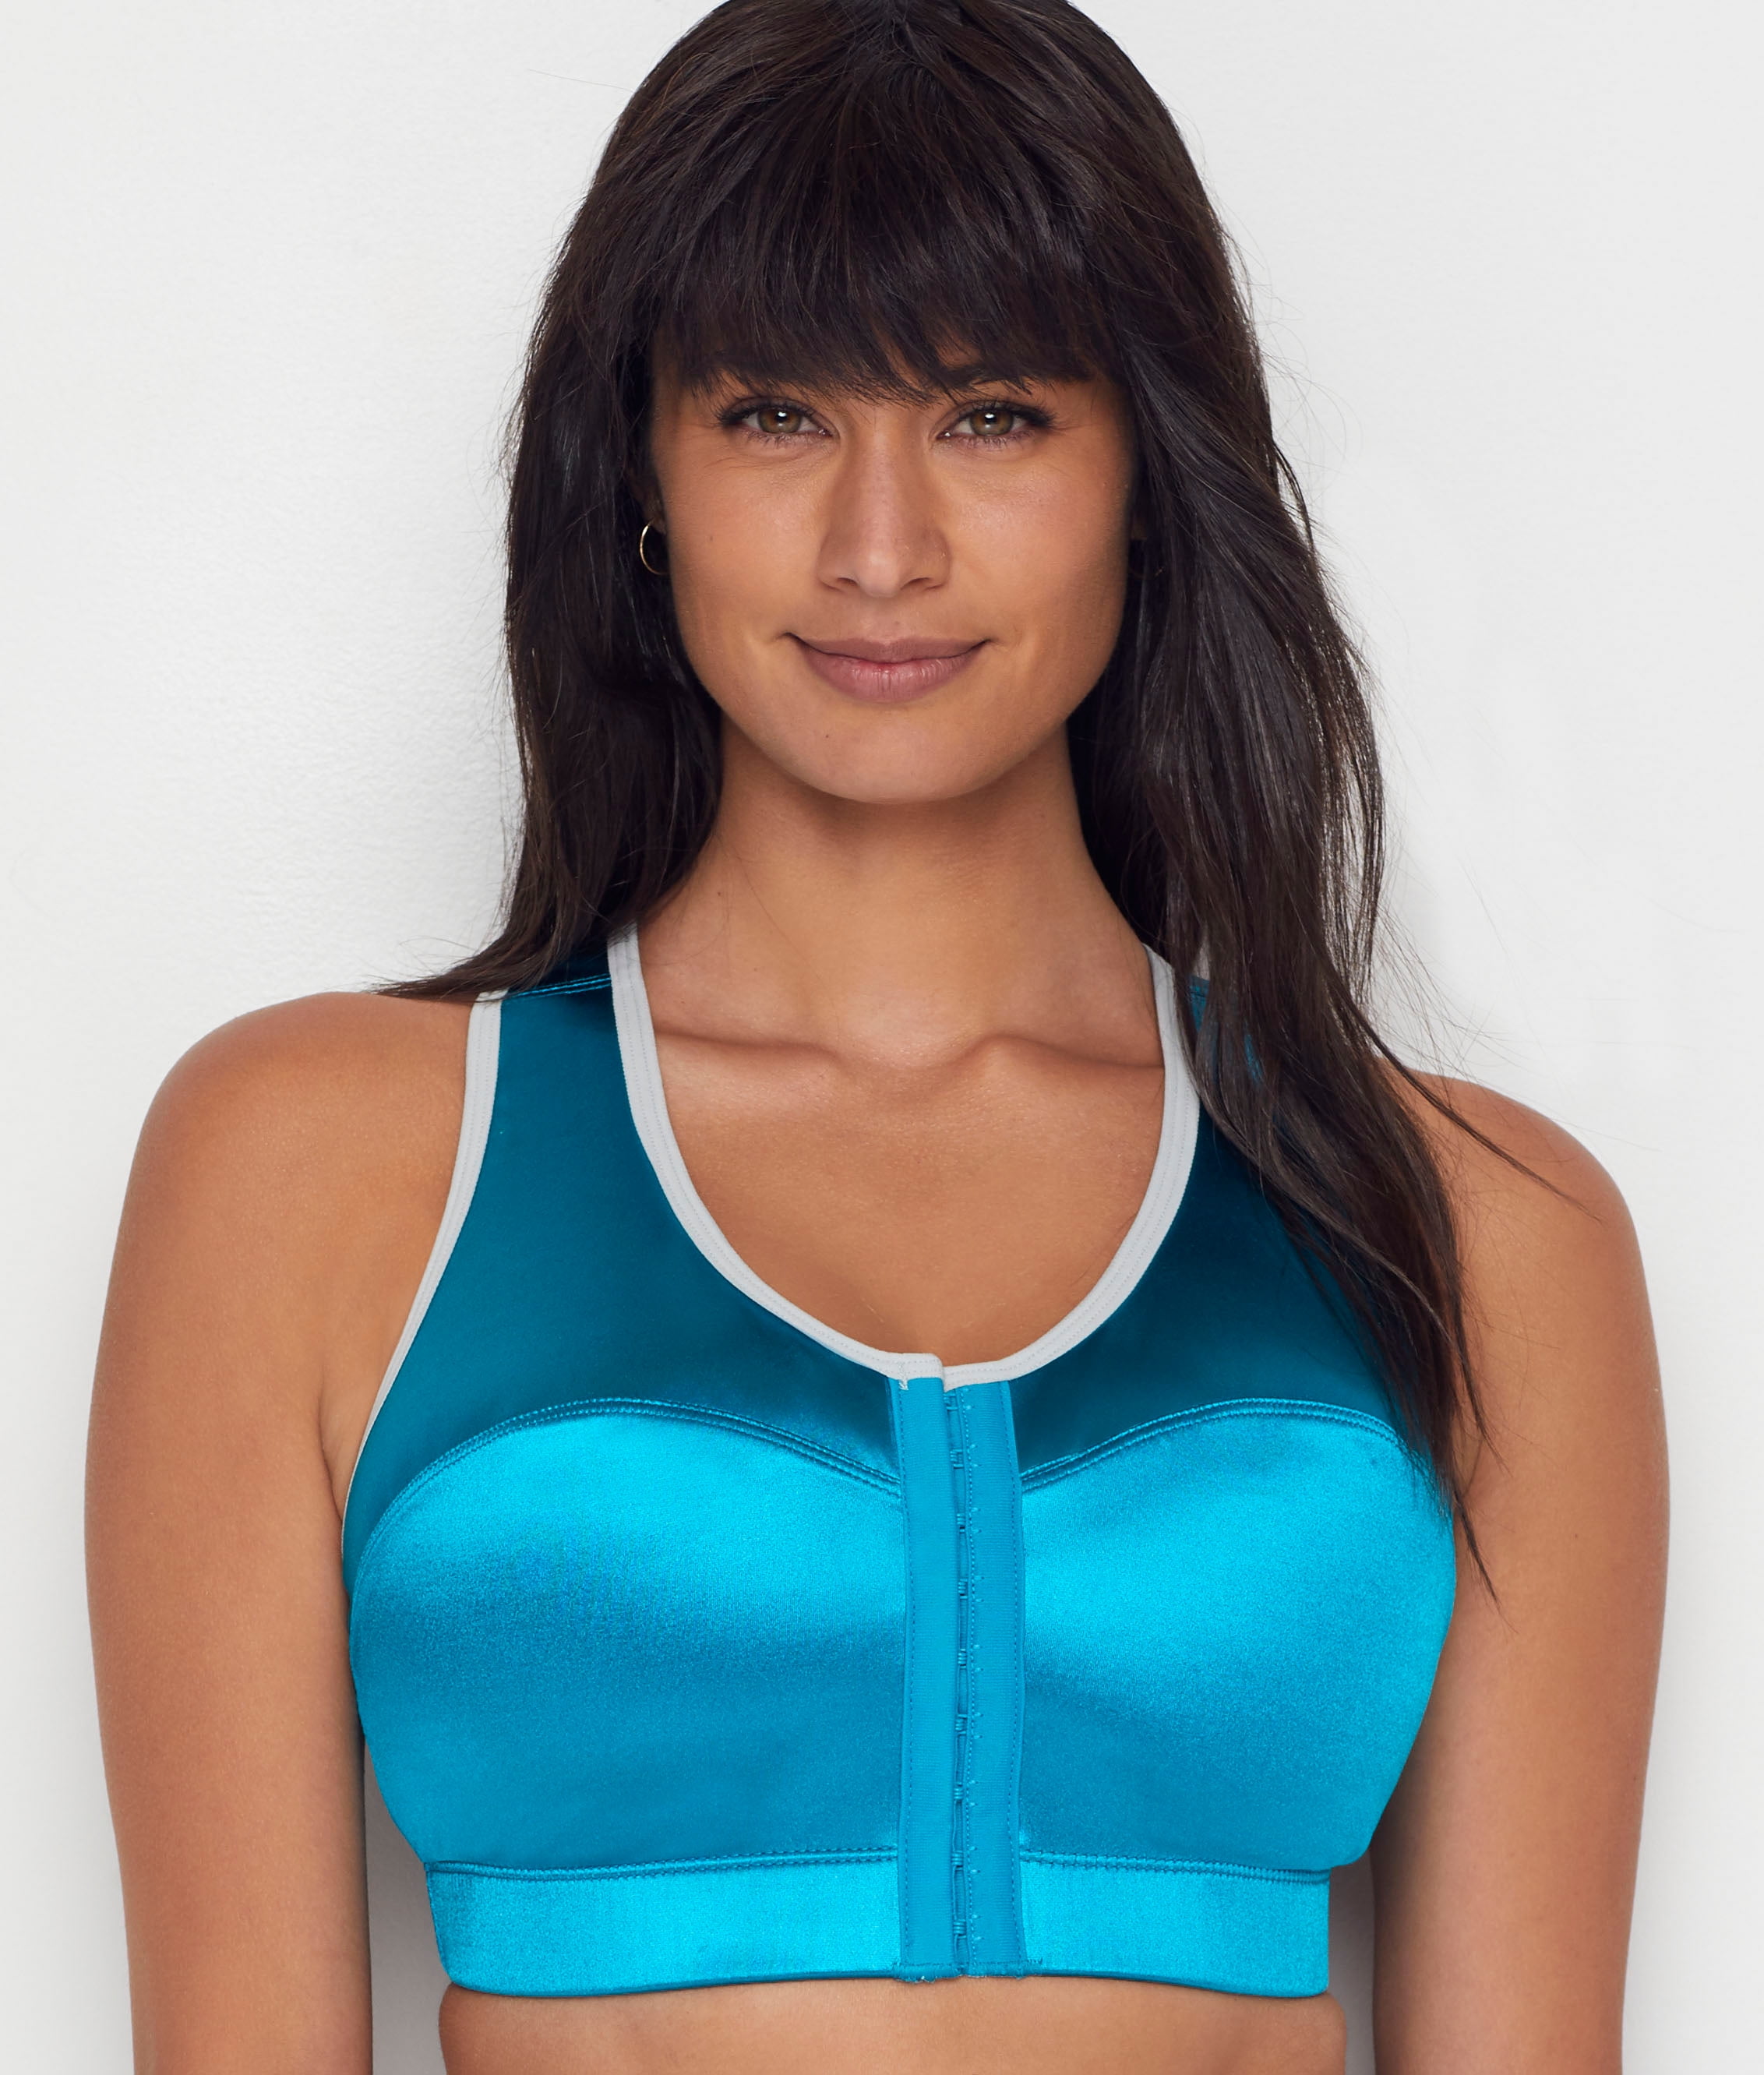 Enell Full Figure Maximum Control Wire-Free Sports Bra & Reviews